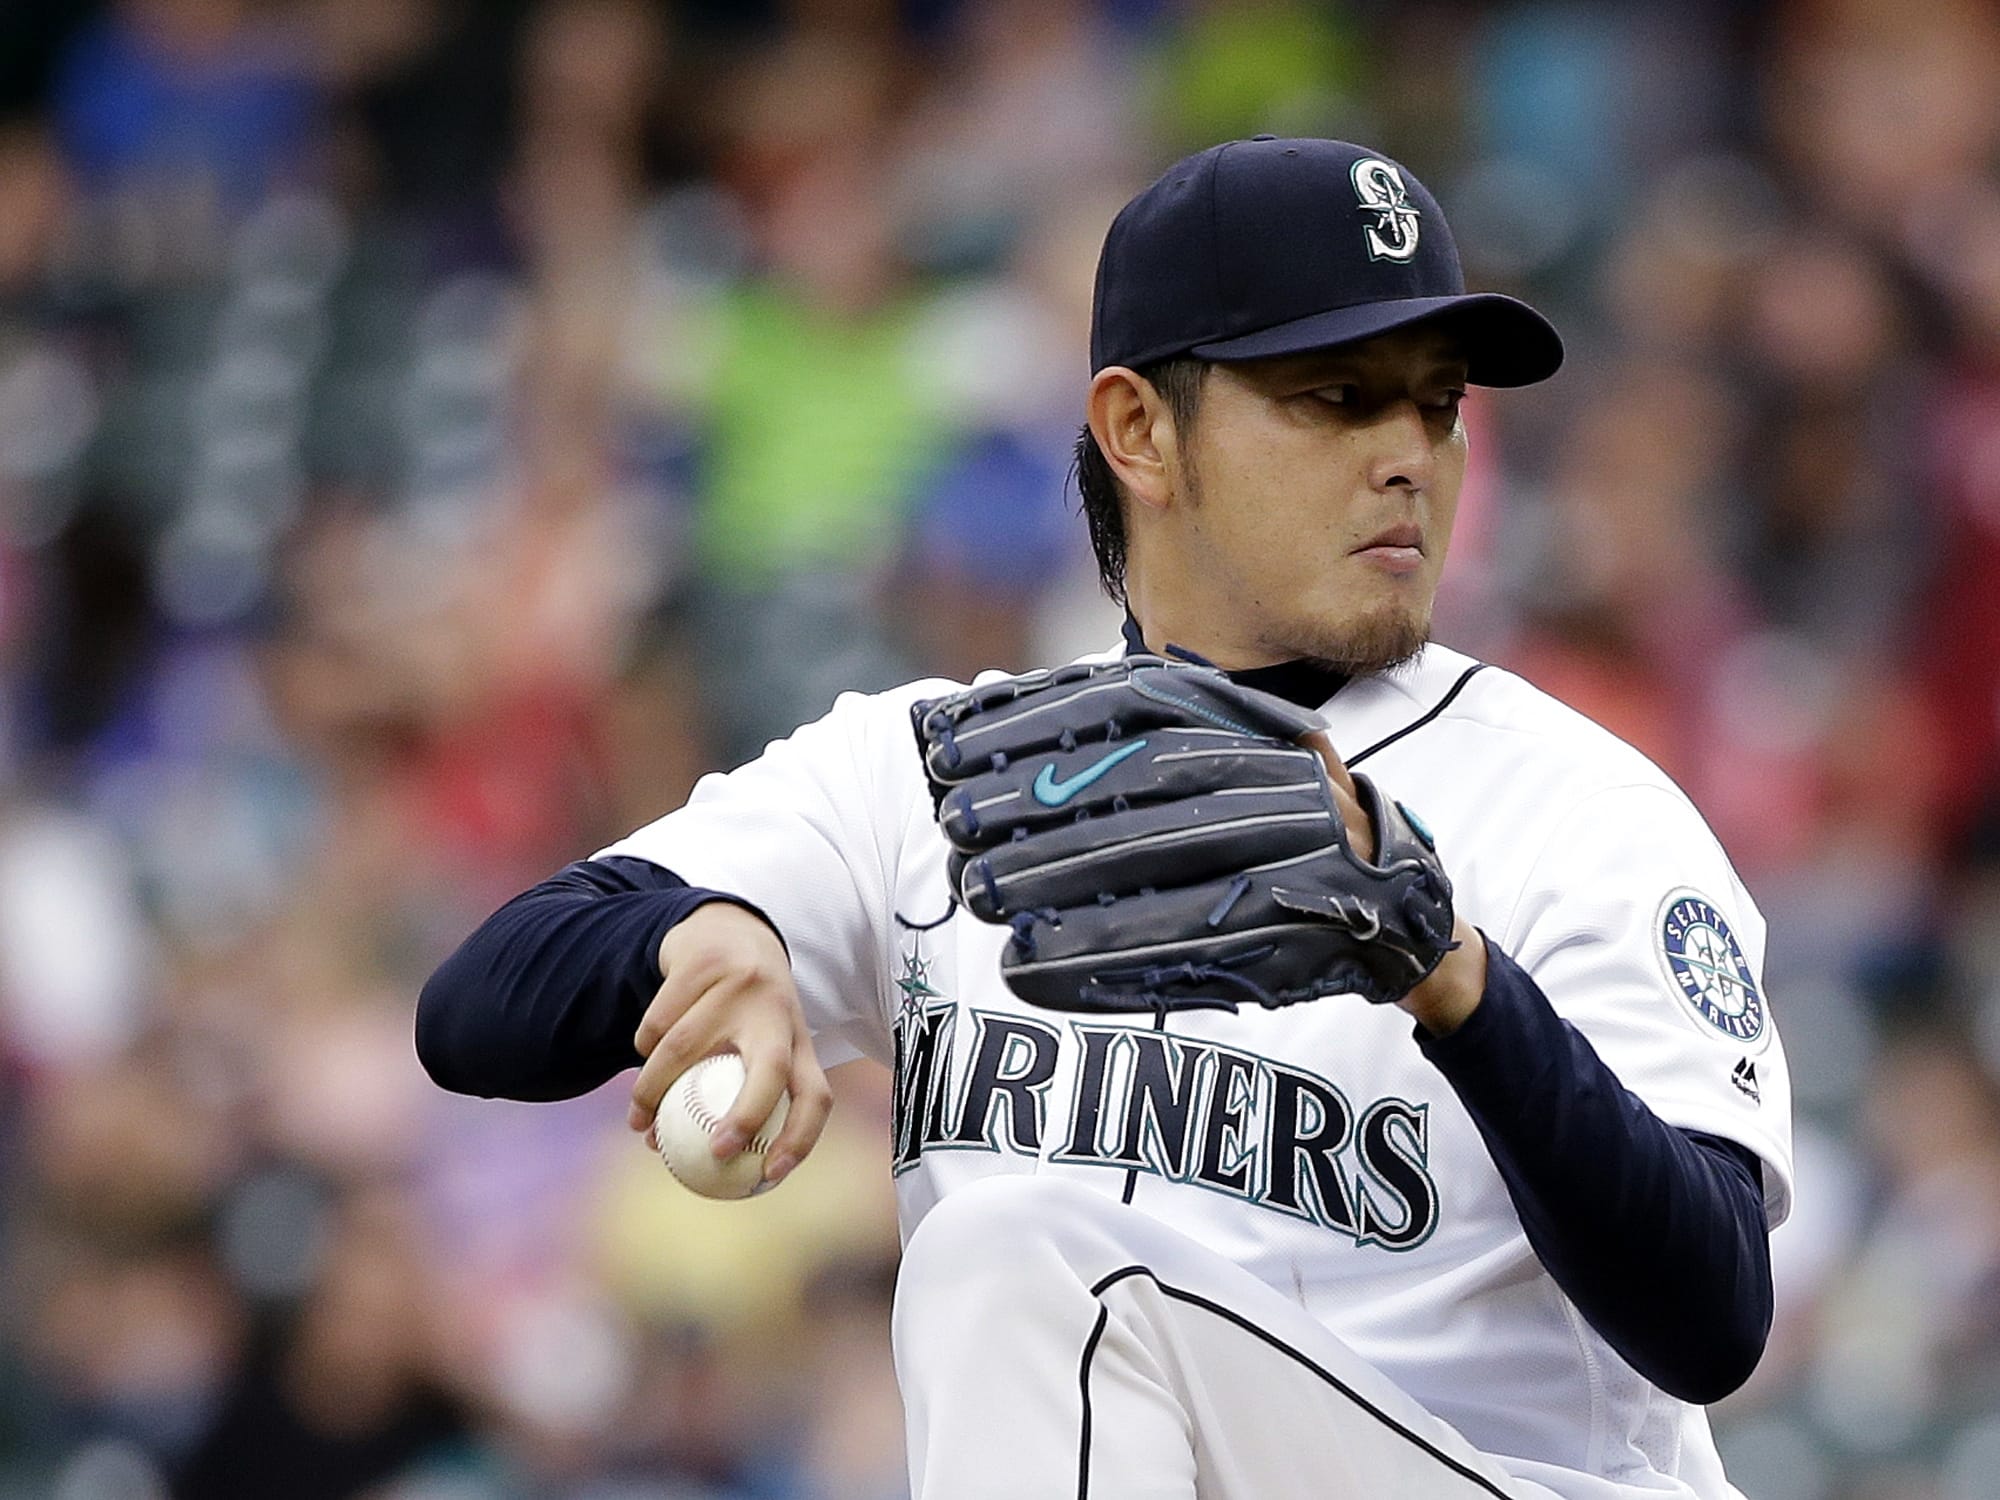 Seattle Mariners starting pitcher Hisashi Iwakuma throws against the Detroit Tigers in the first inning of a baseball game, Monday, Aug. 8, 2016, in Seattle.